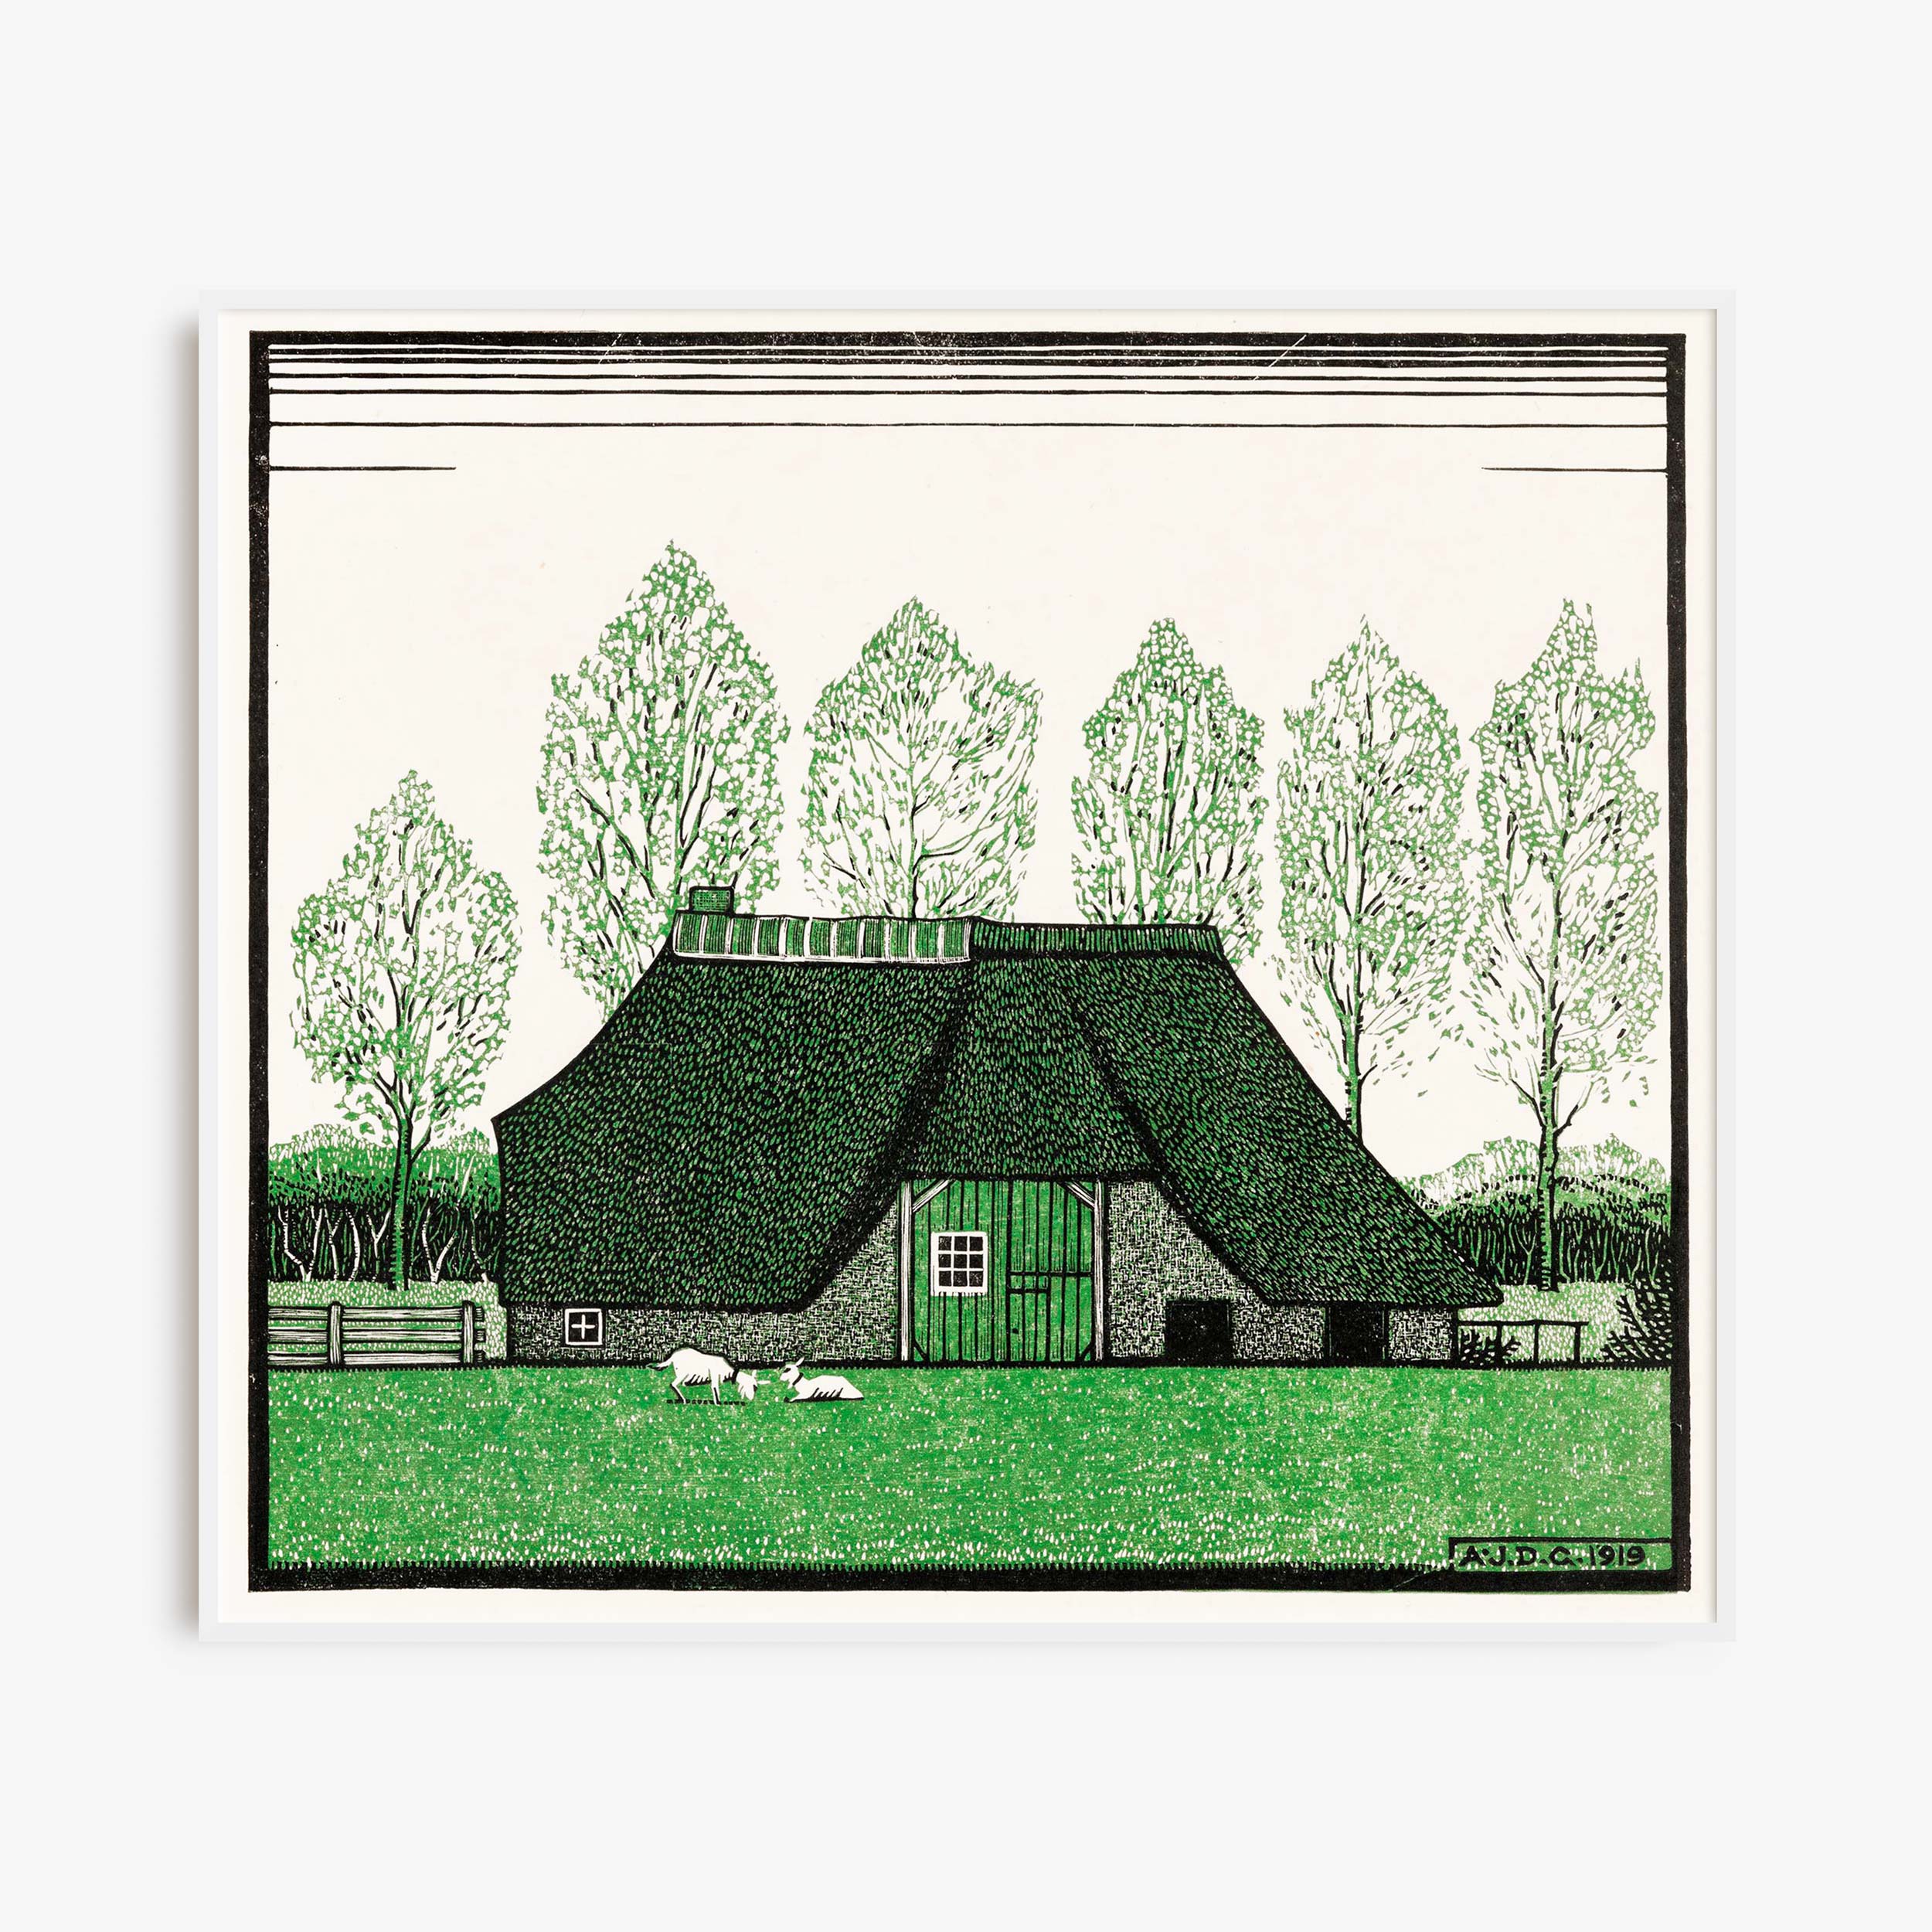 Farmhouse with thatched roof